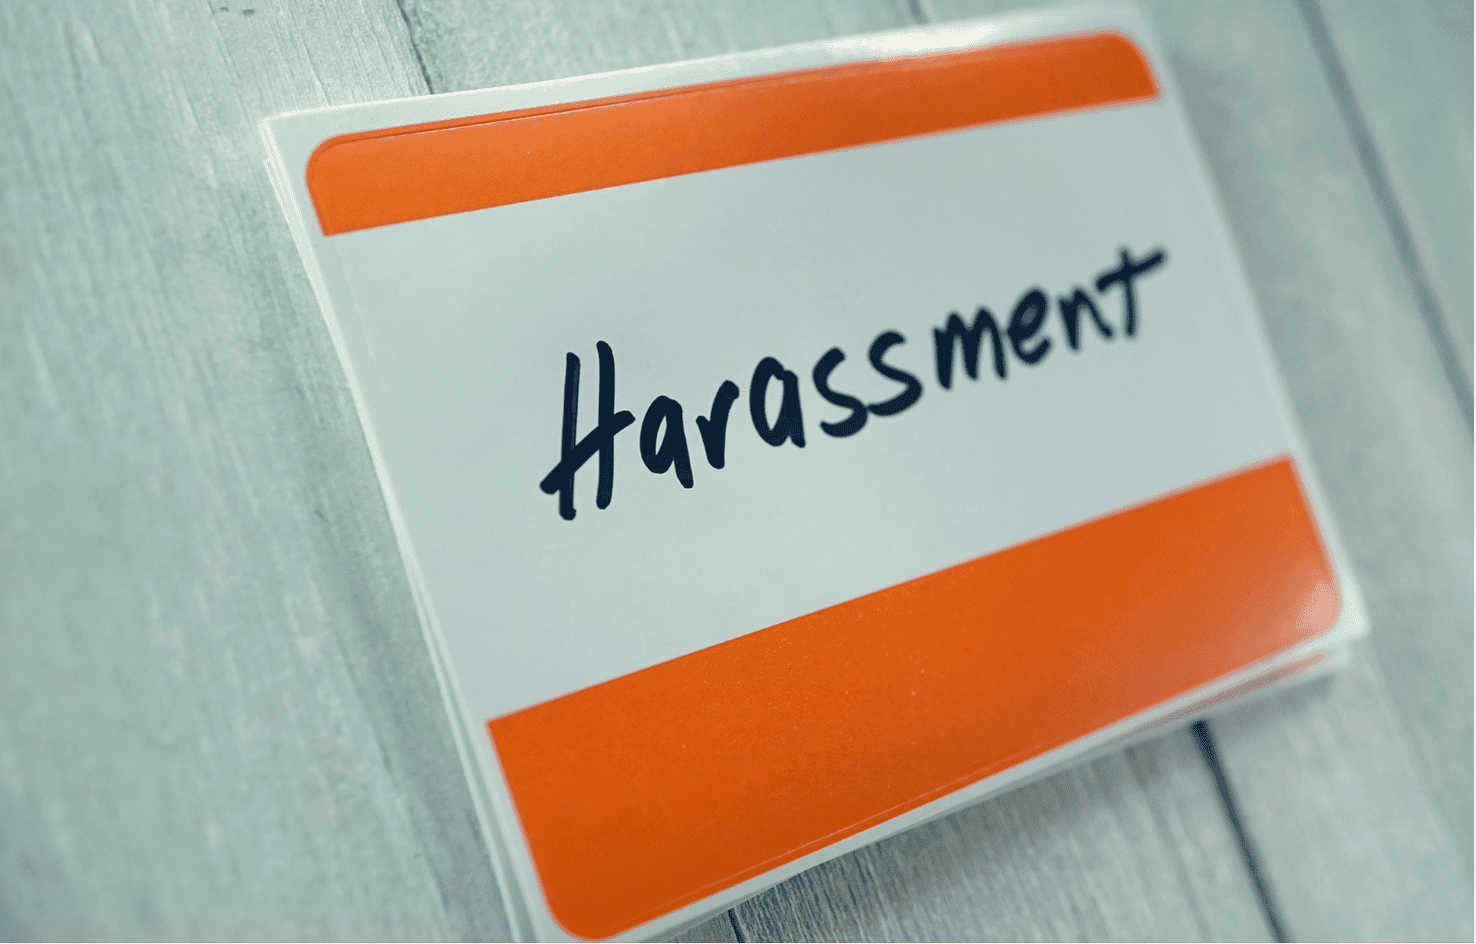 Image of a rail ticket with the word 'harassment' written on it.